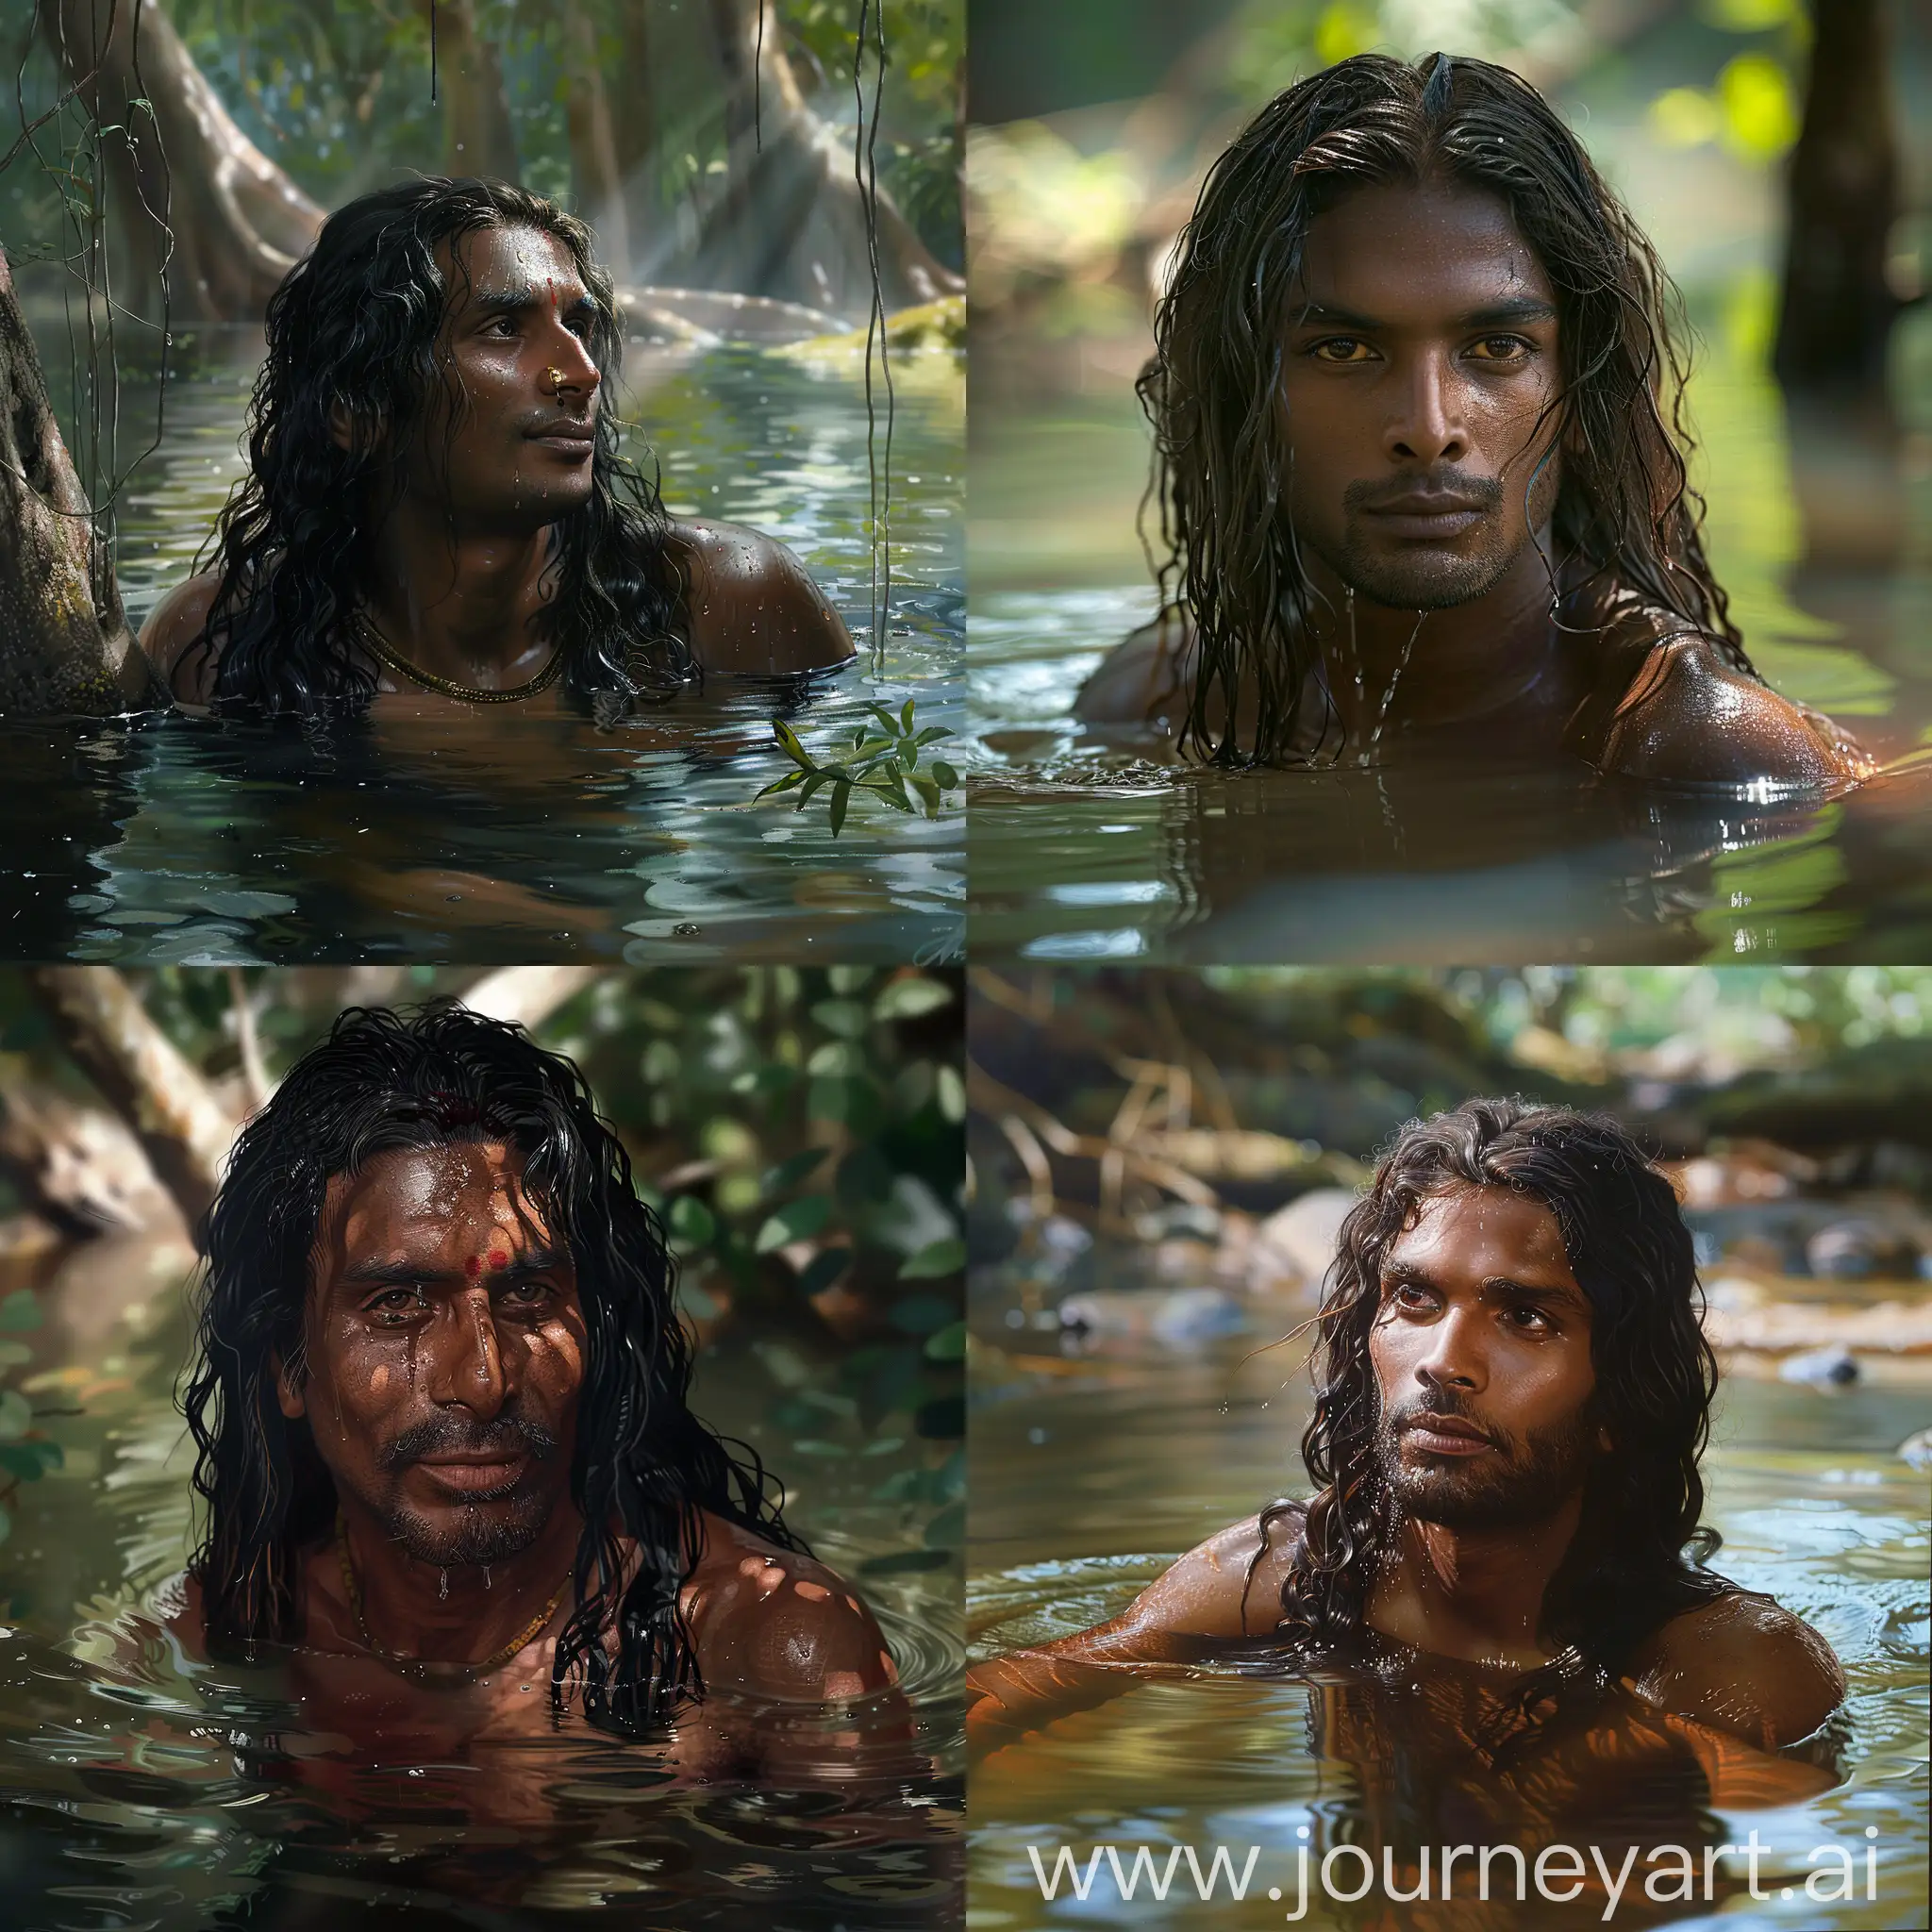 Ancient man of South india from northern kasaragod, age of 30,bathing in forest lake, he had very long hair, he is masculine, black skinned,brown colour eye
